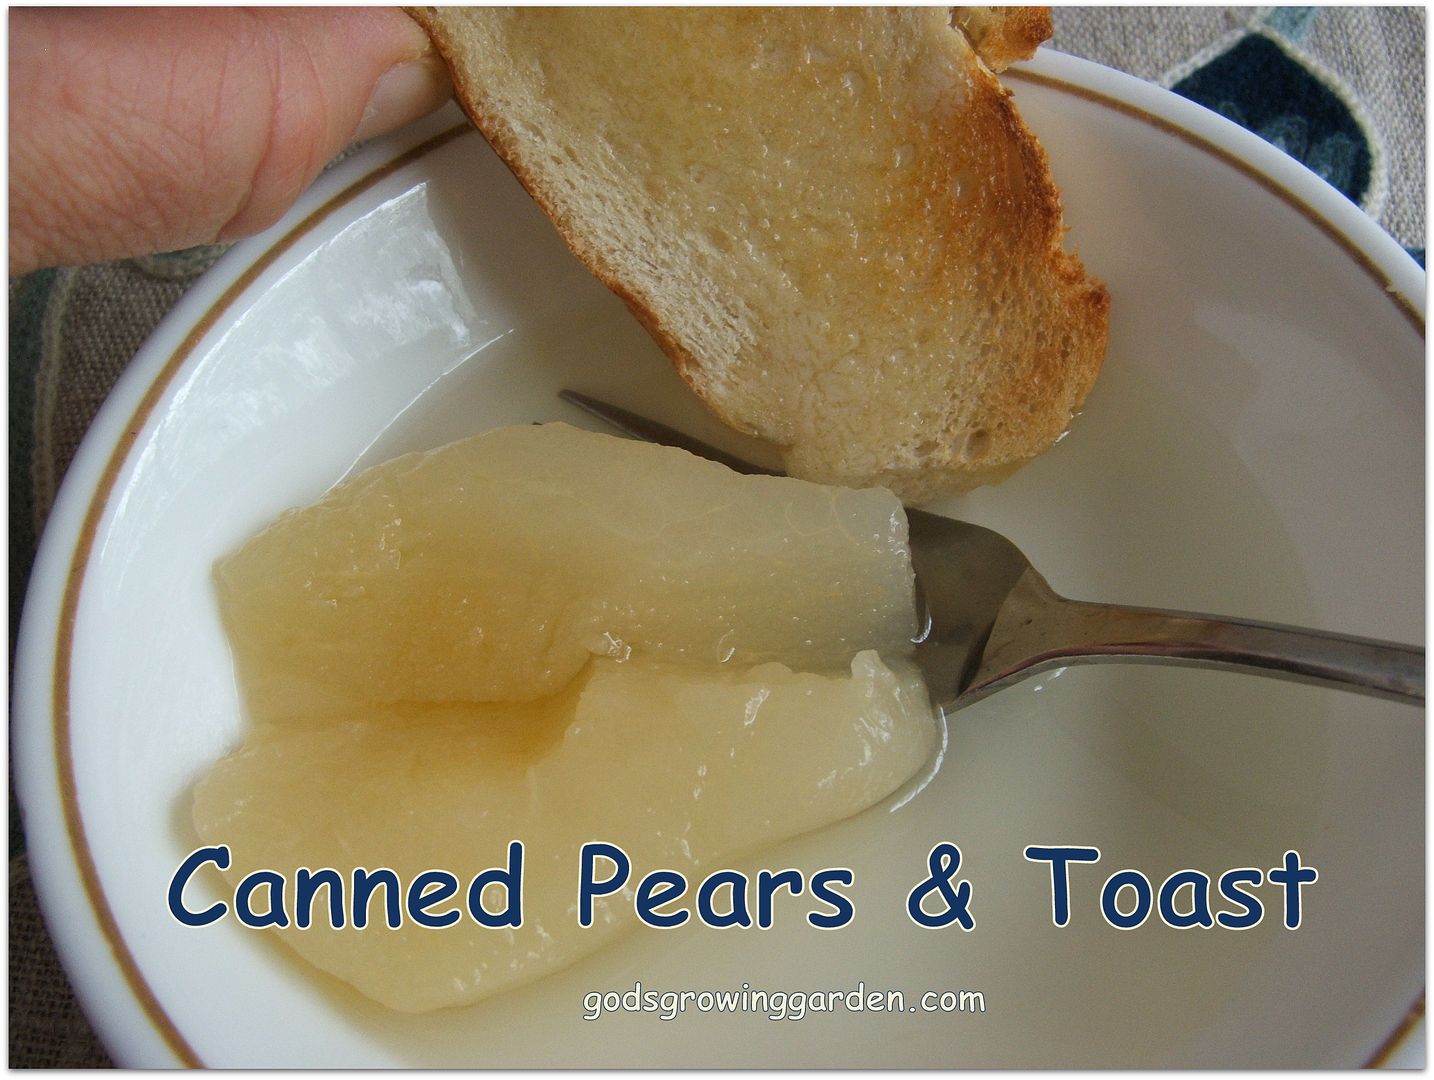 Canned Pears & Toast by Angie Ouellette-Tower for godsgrowinggarden.com photo 006_zpsaf5eb6cd.jpg